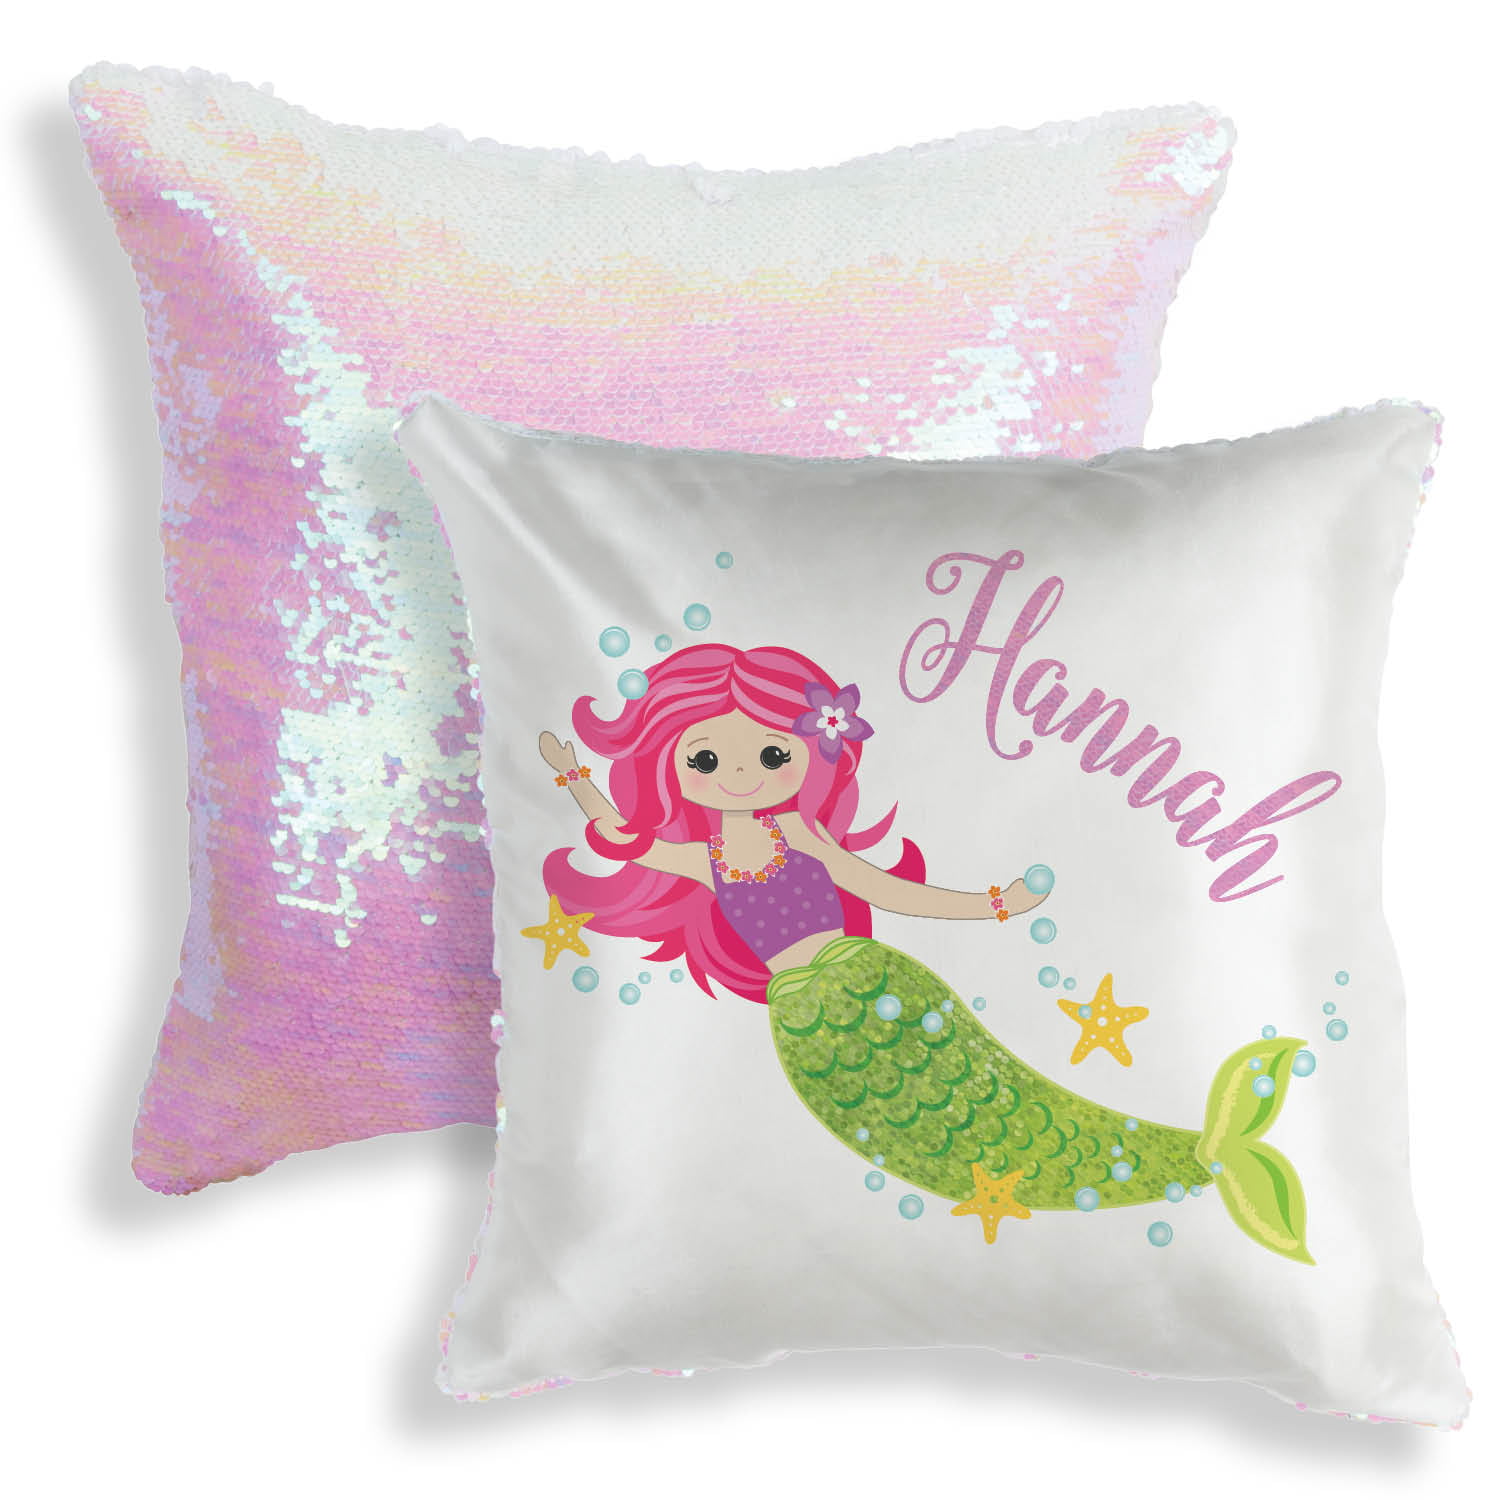 personalised sequin cushion